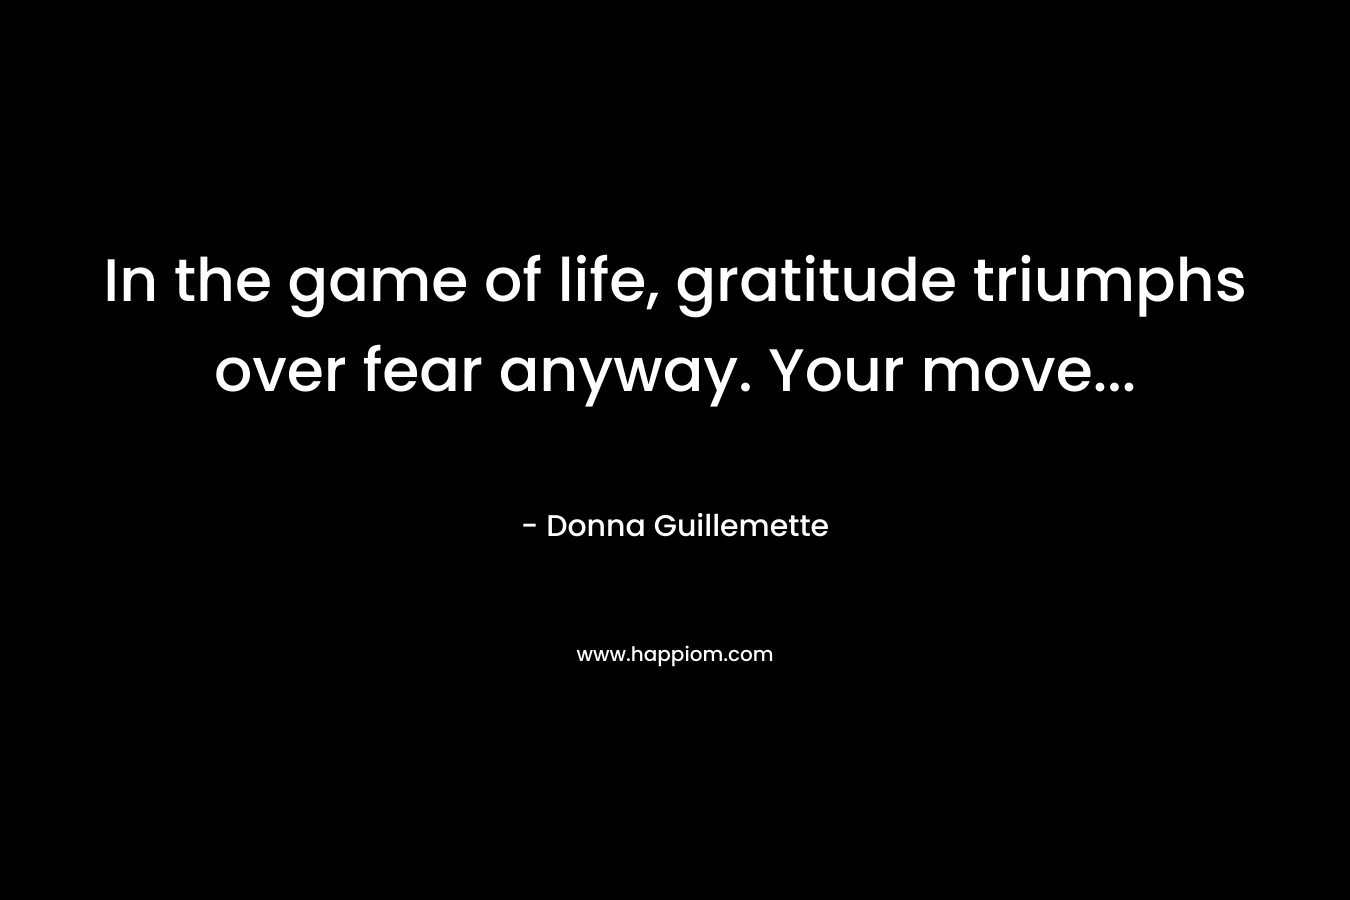 In the game of life, gratitude triumphs over fear anyway. Your move...